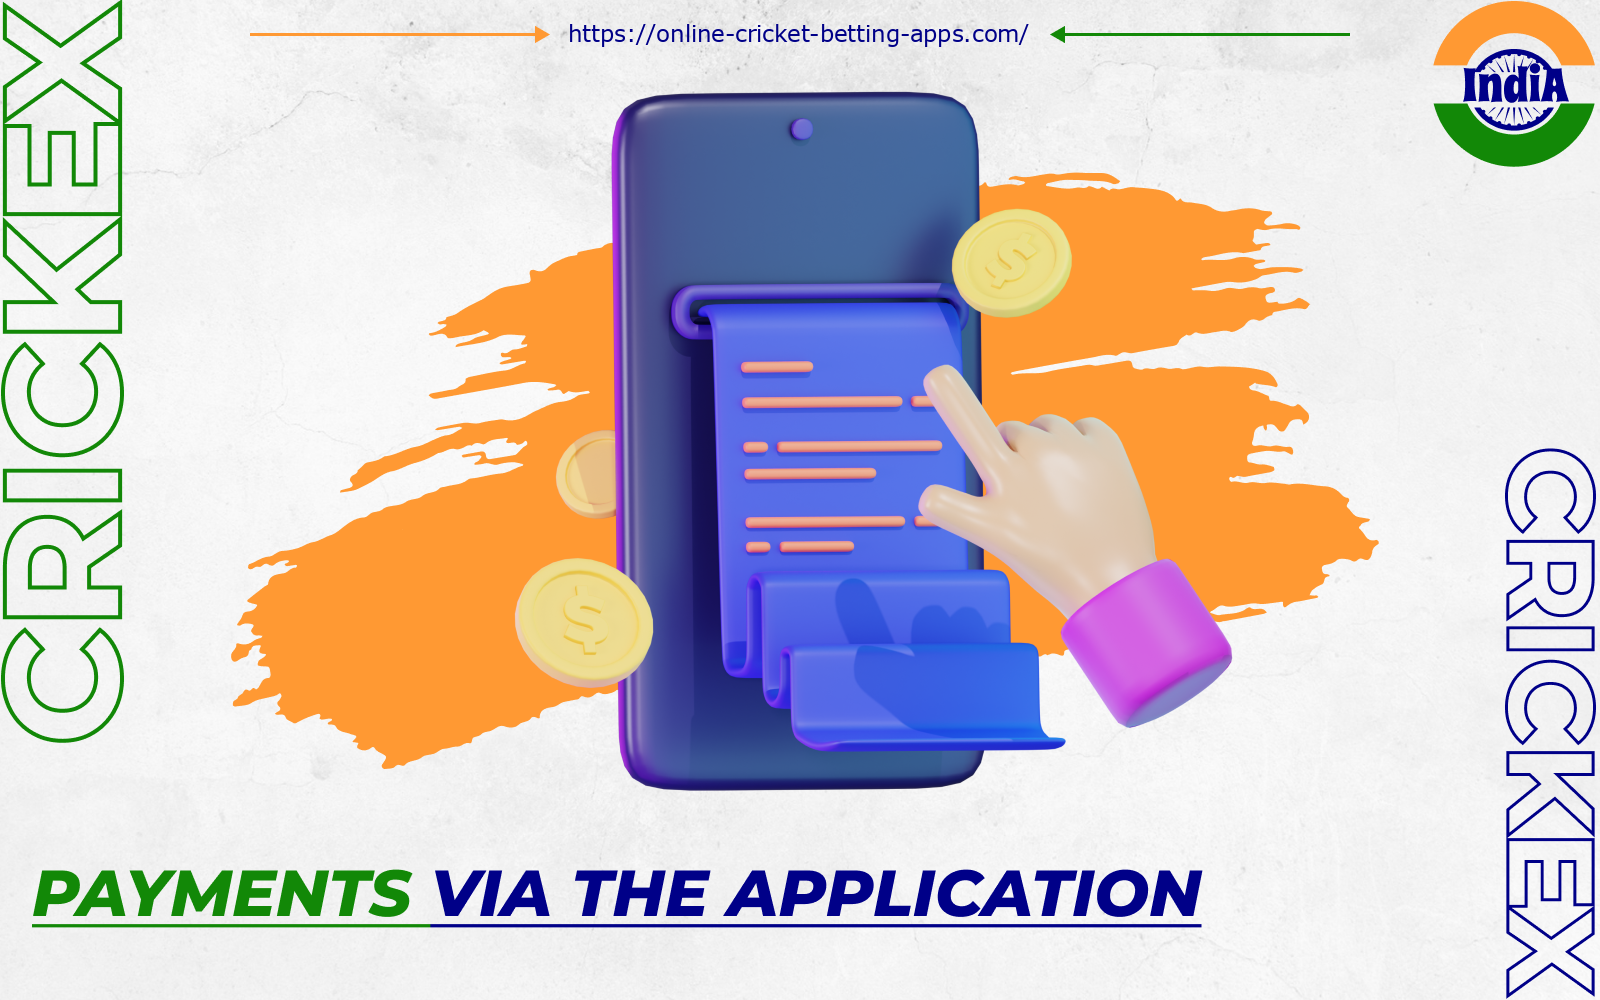 With the Crickex bet app, Indian users can manage their balance, recharge or withdraw INR from their balance sheet